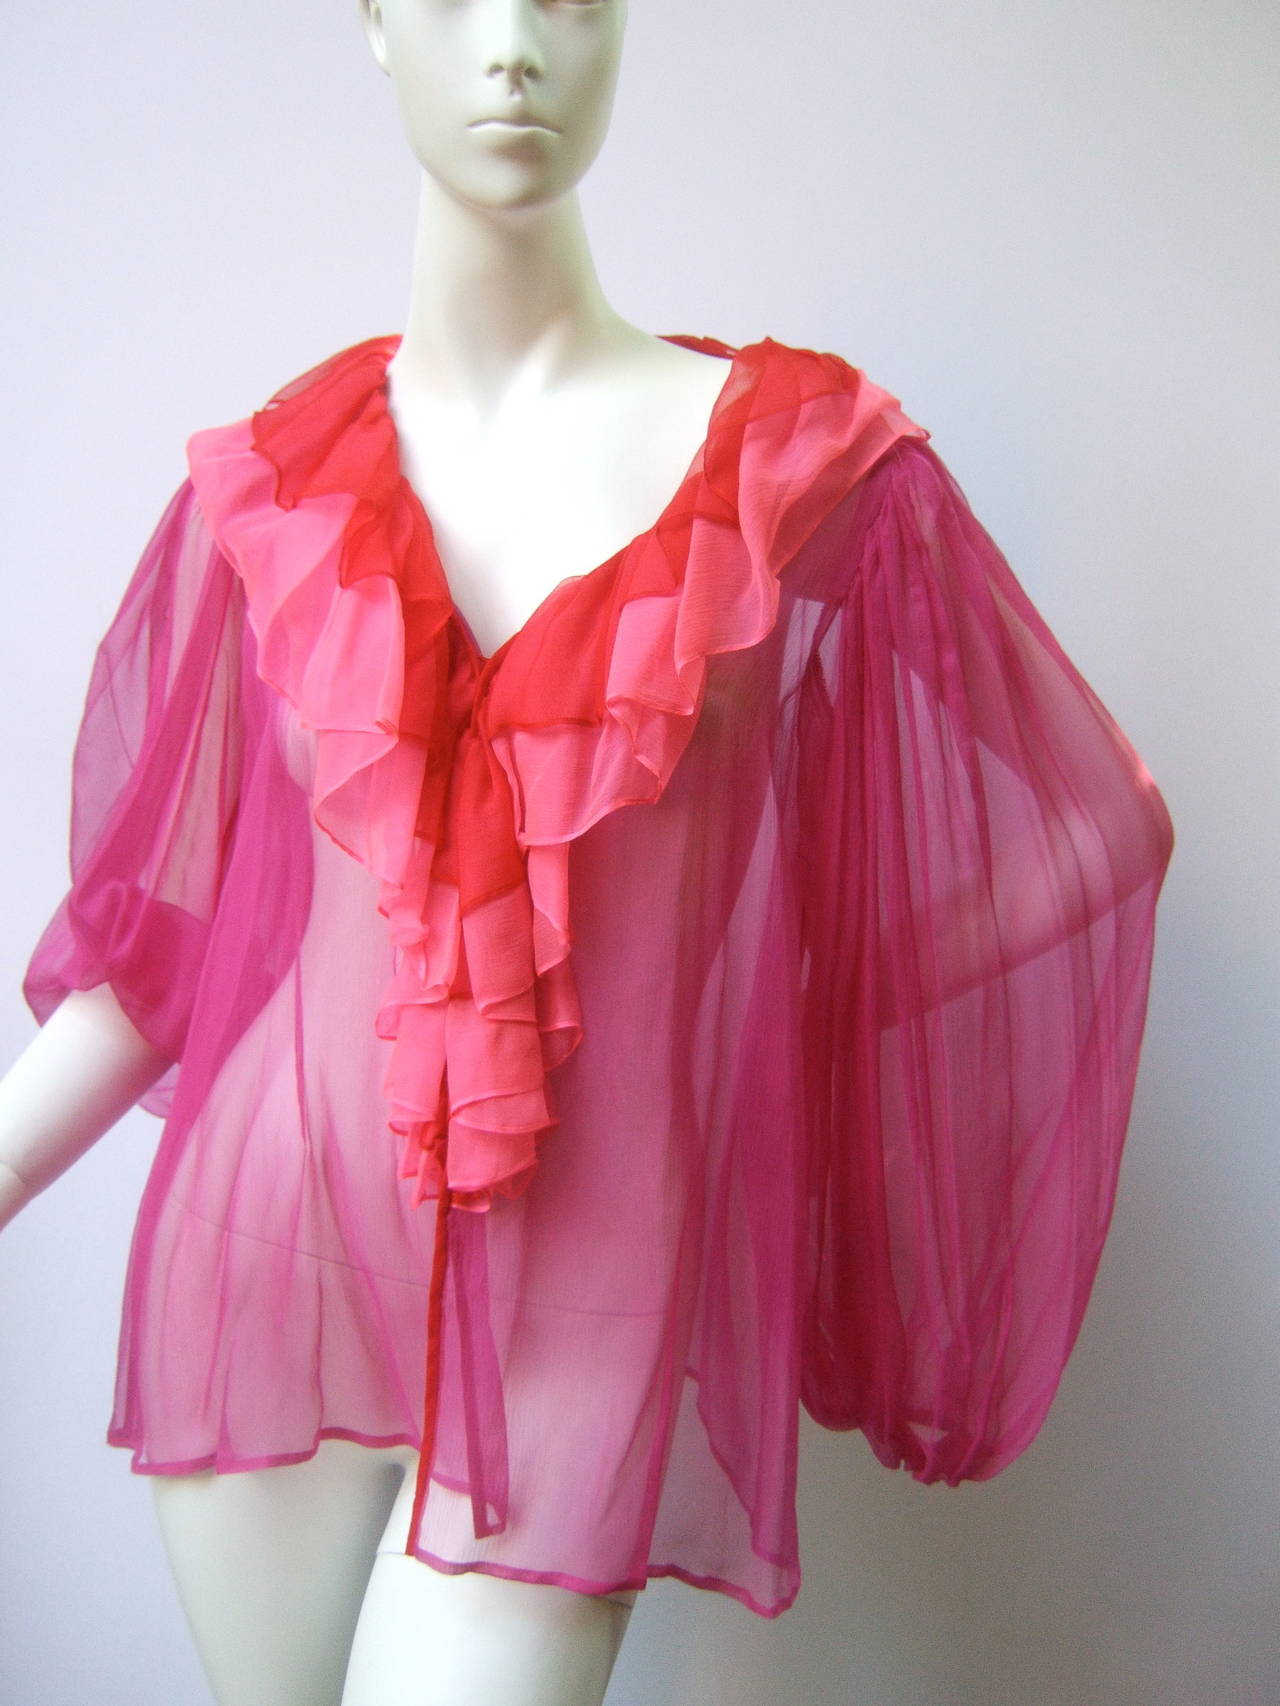 Yves Saint Laurent Rive Gauche Silk duster & blouse ensemble c 1970s
The stunning high fashion blouse & dramatic ruffled trim duster are designed with fuchsia, deep pink & crimson red sheer floaty silk that has an ethereal quality

The frothy